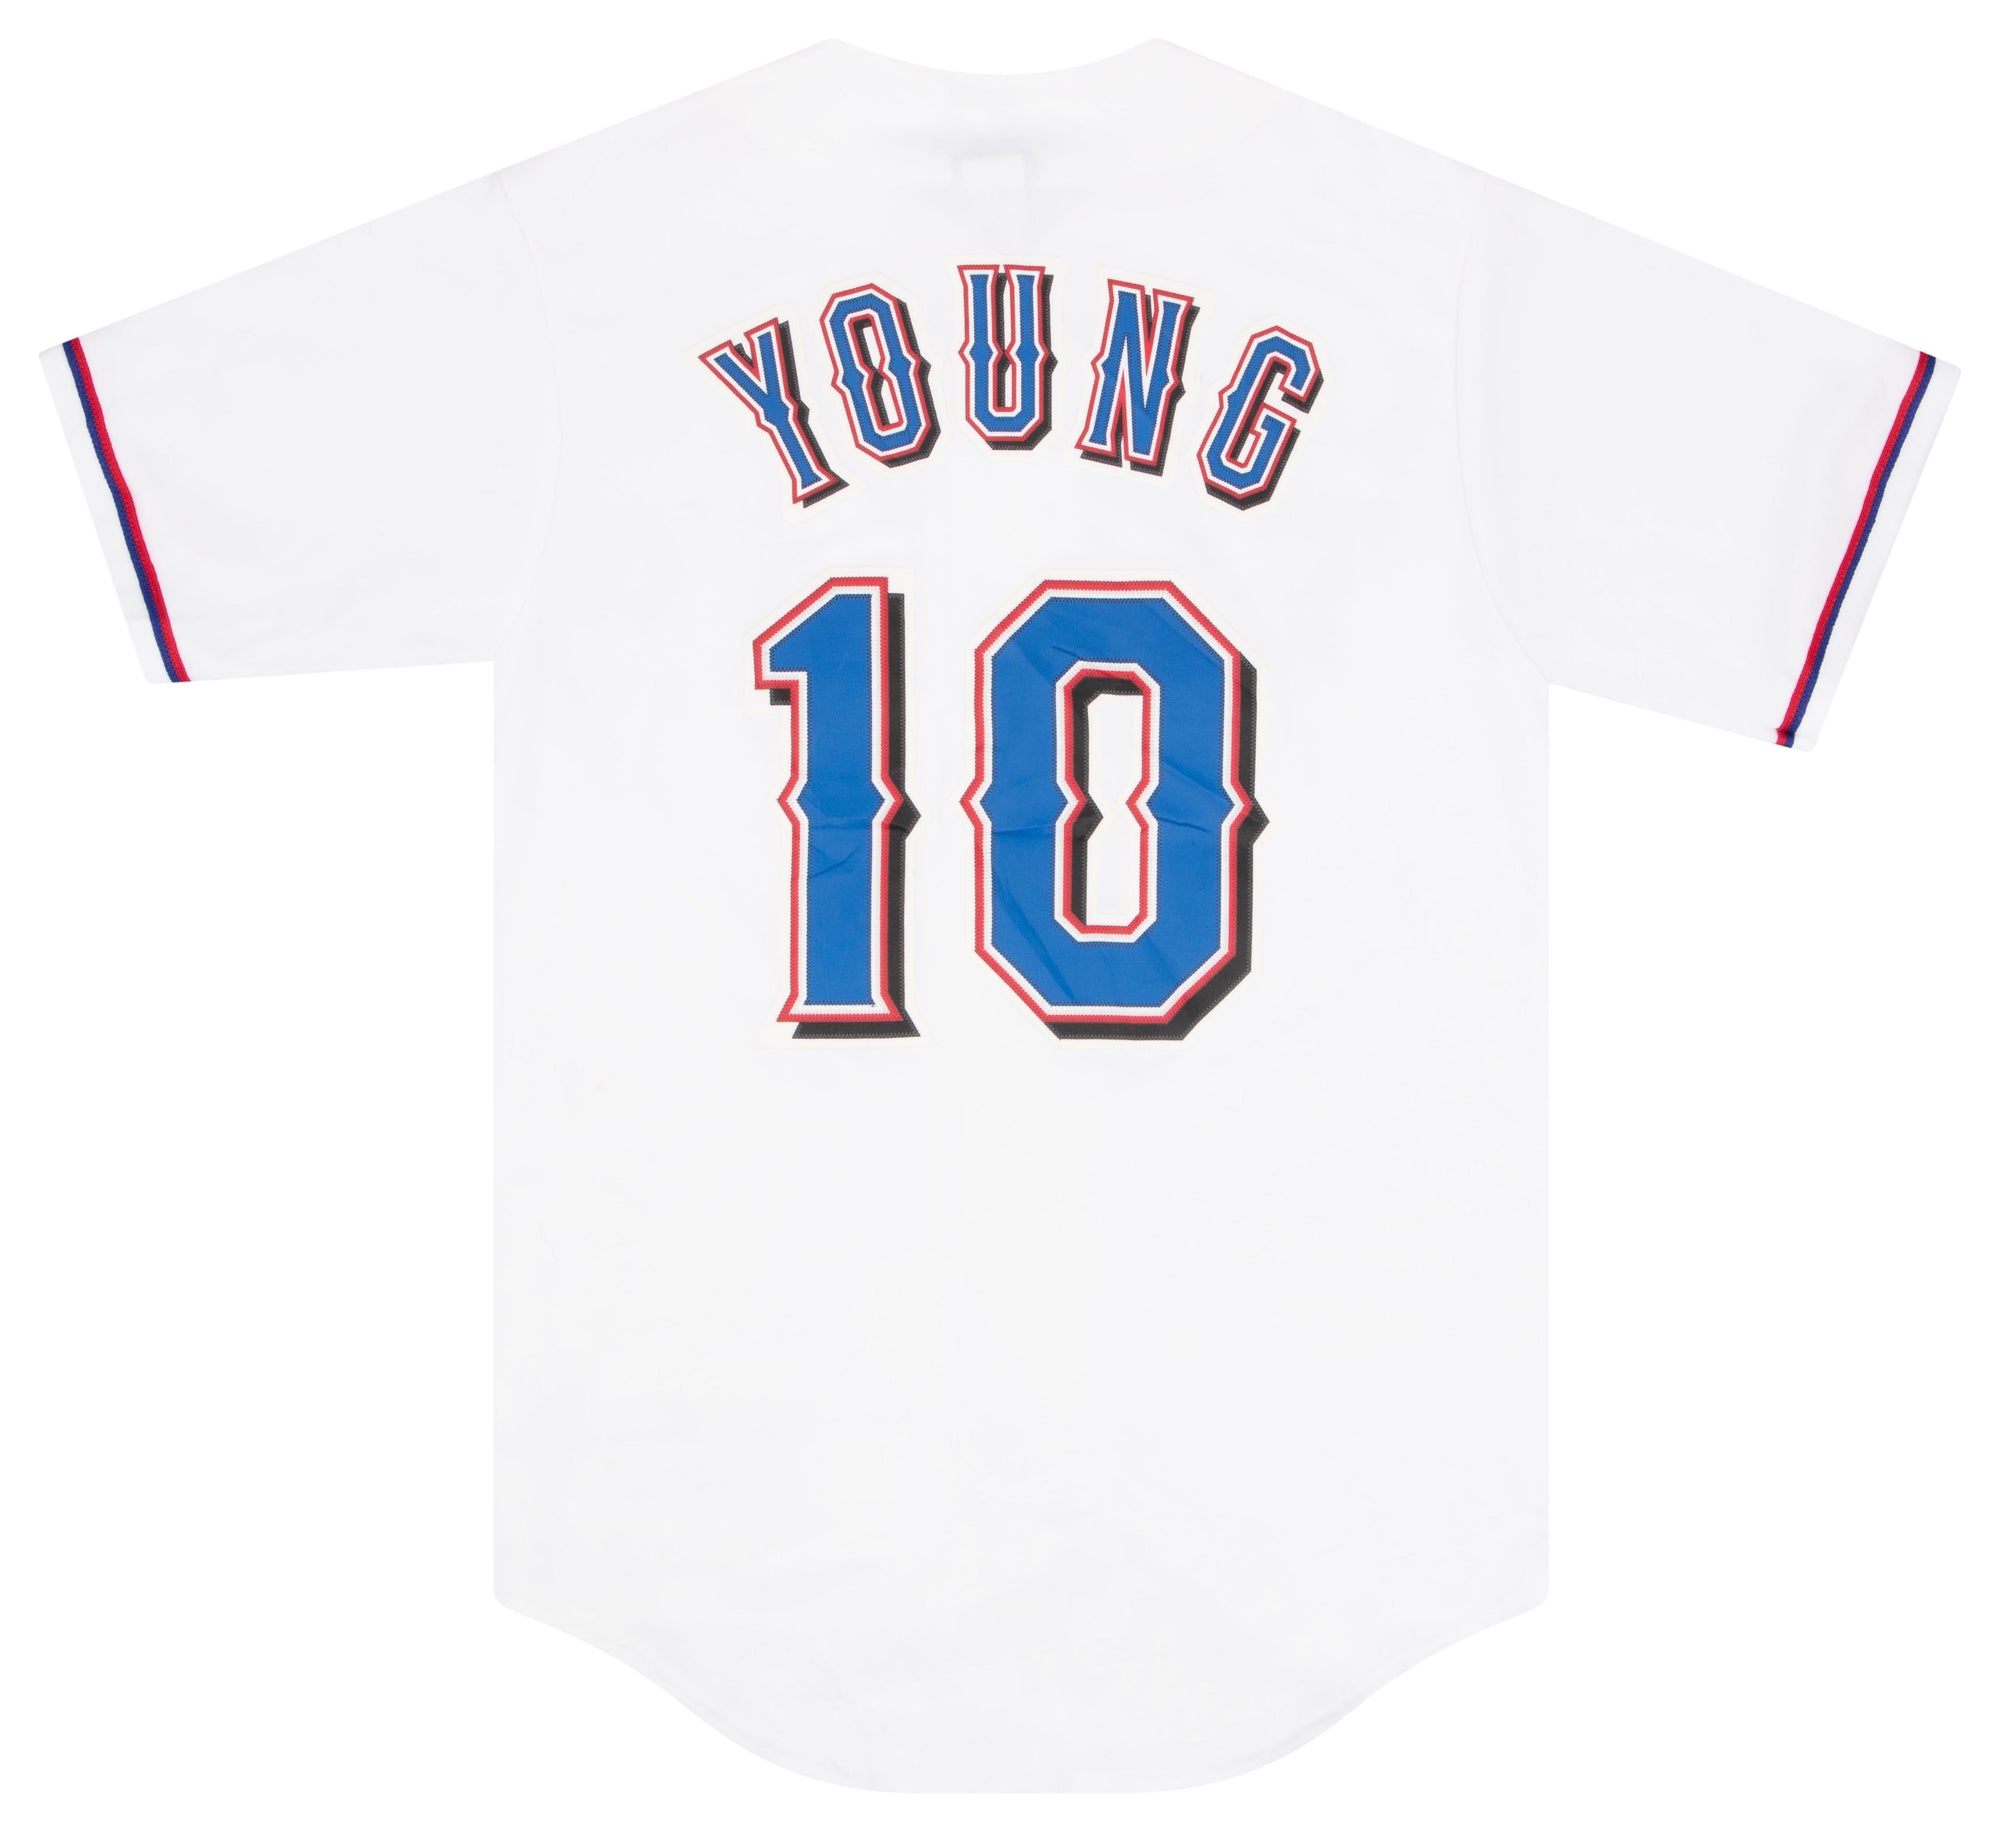 2009-12 TEXAS RANGERS YOUNG #10 MAJESTIC JERSEY (HOME) S